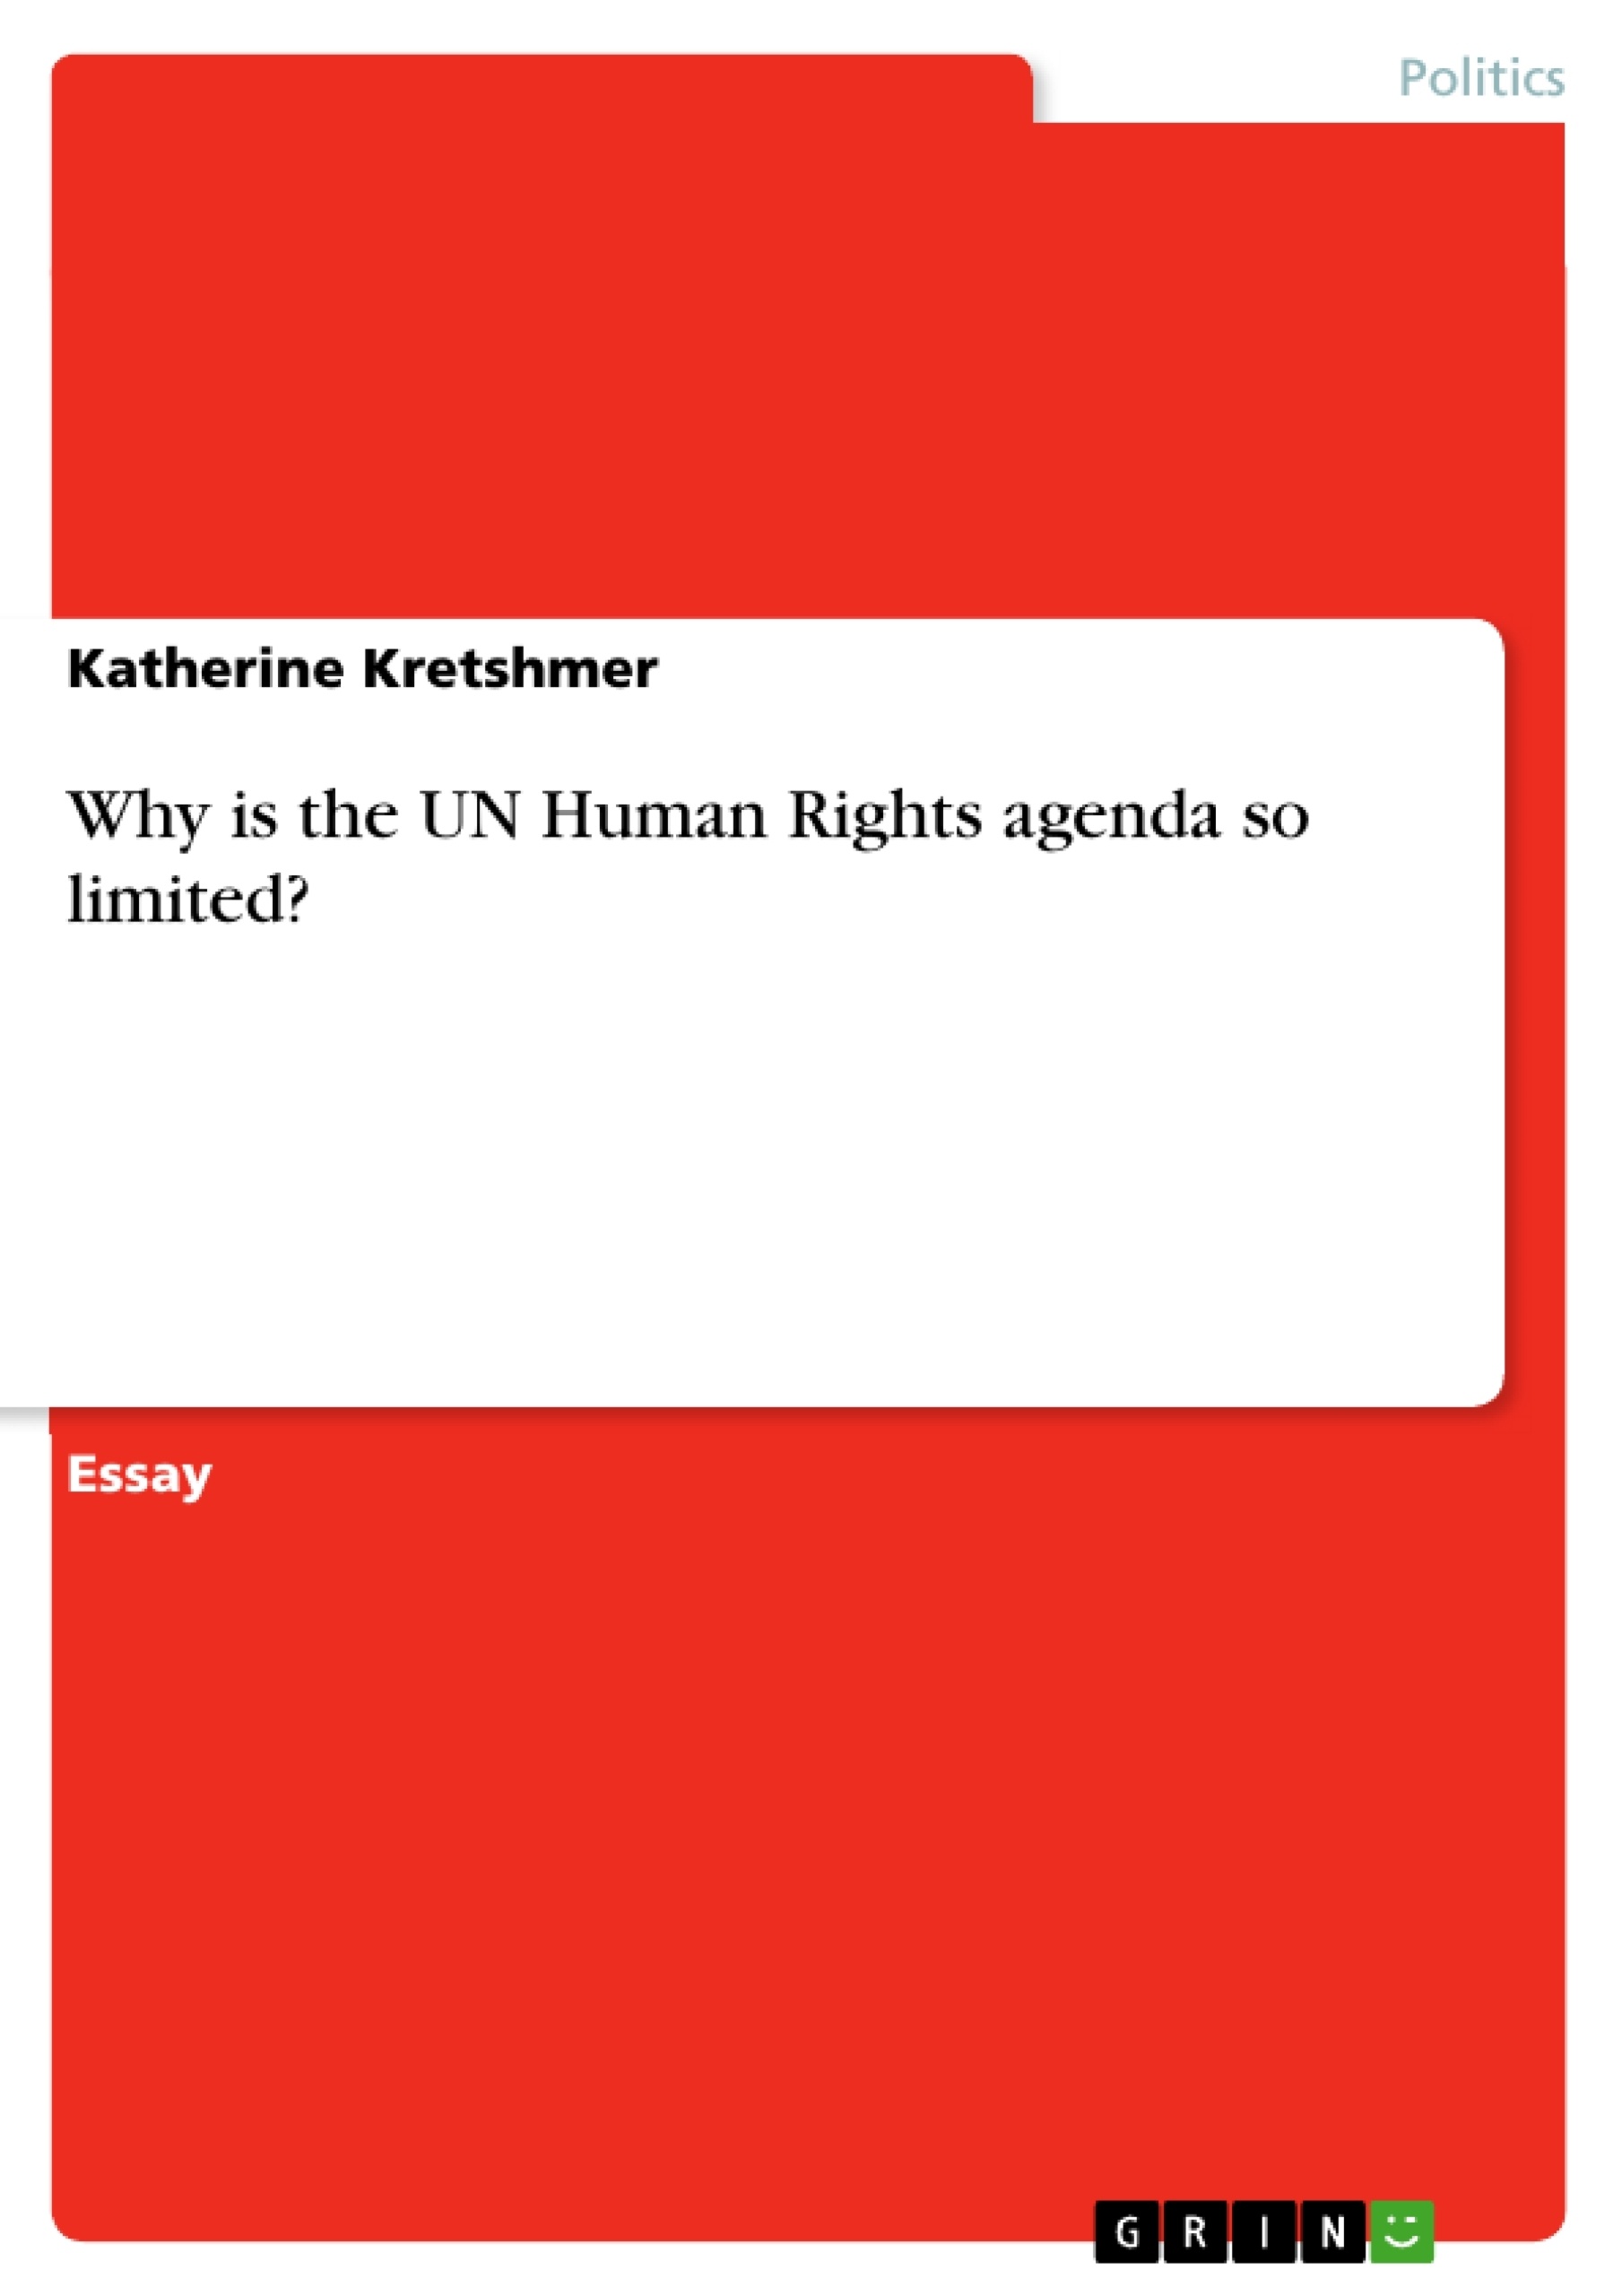 Título: Why is the UN Human Rights agenda so limited?